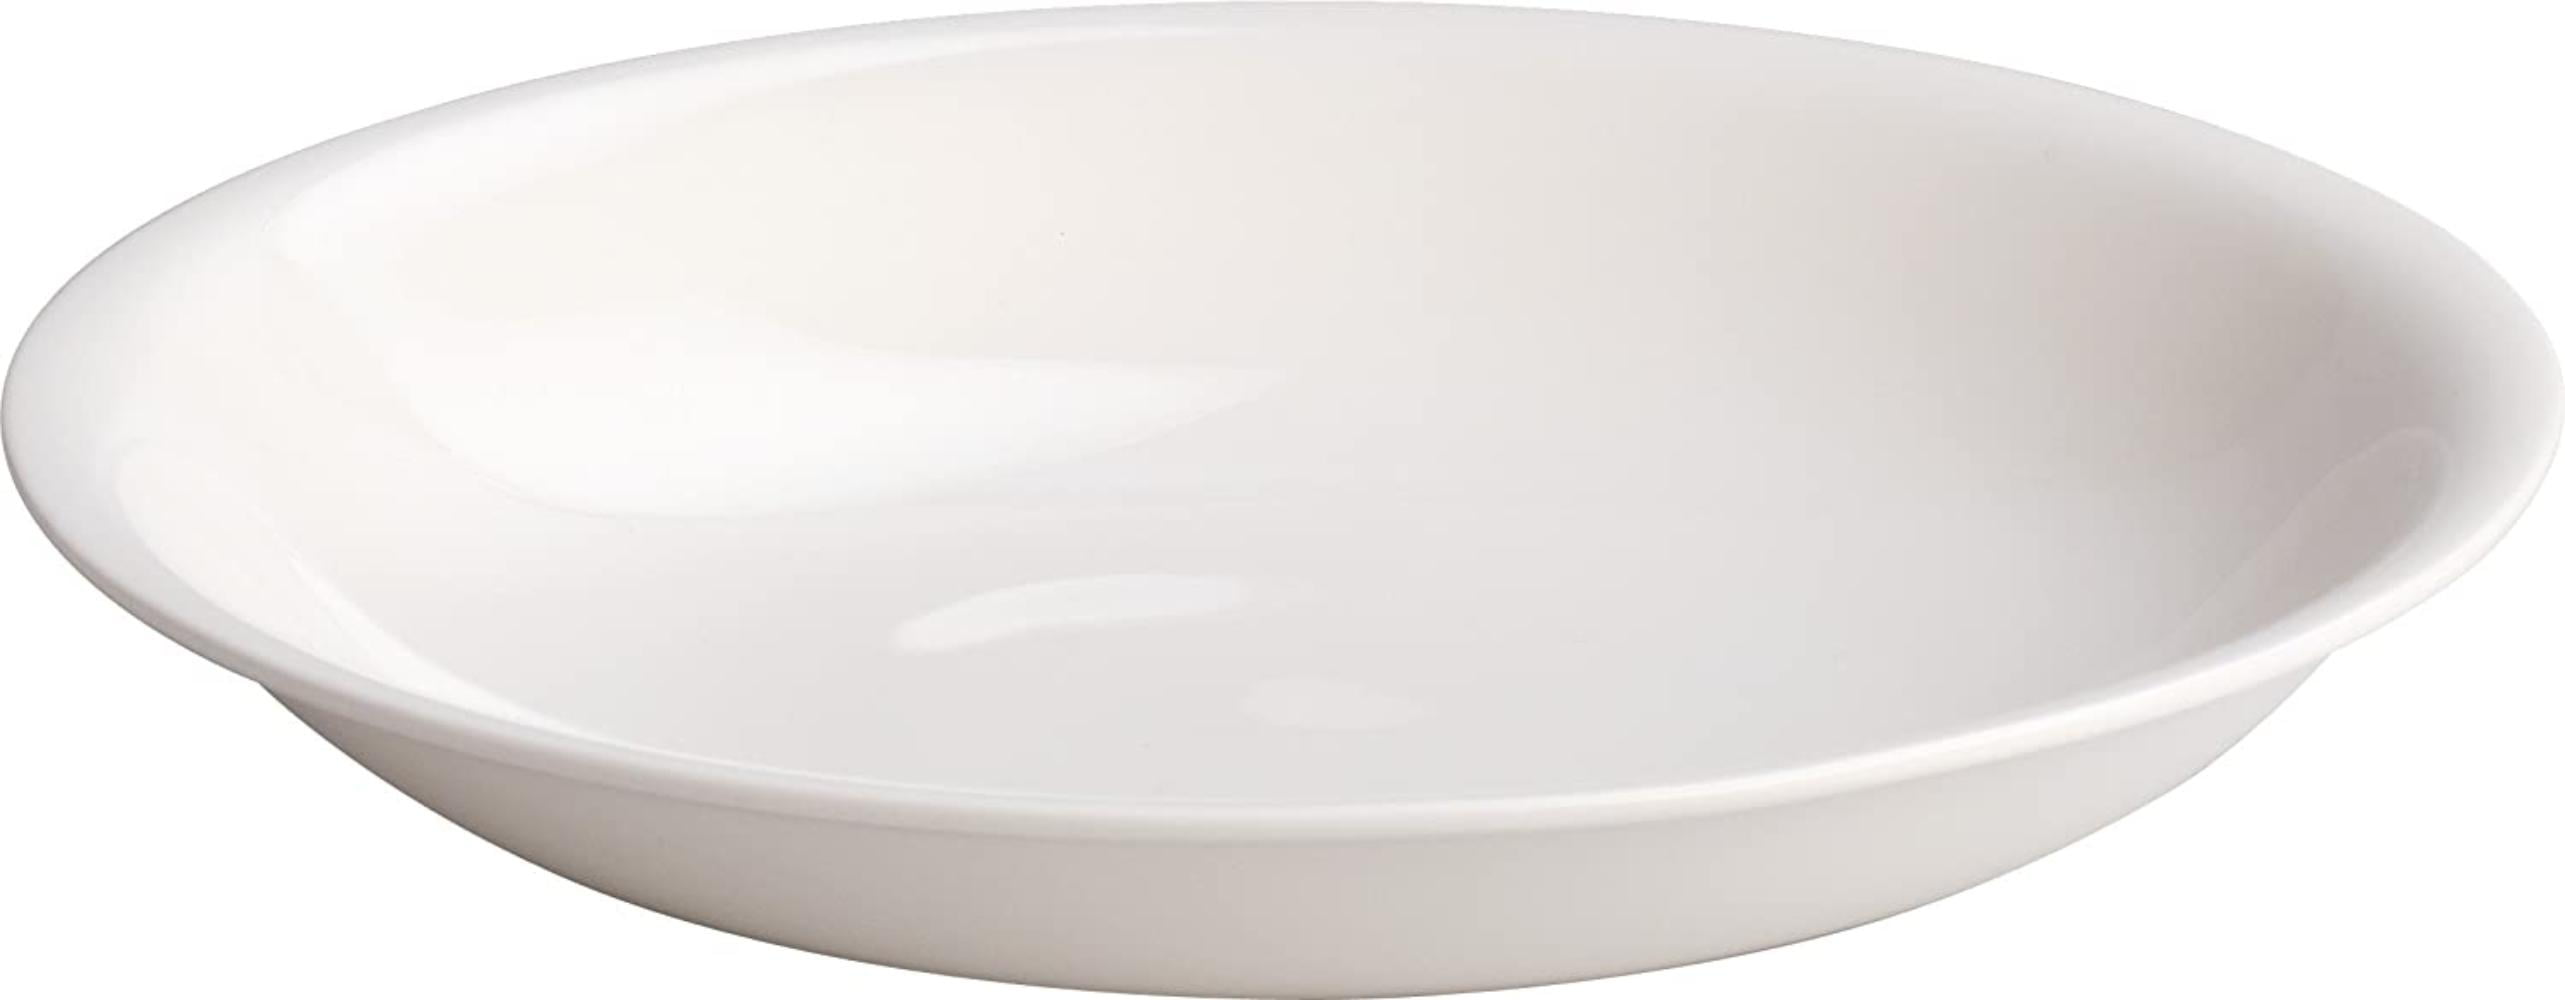 Set of 12 Alessi for Delta White Large Ramekin Bowls Sauce Jelly Butter for sale online 